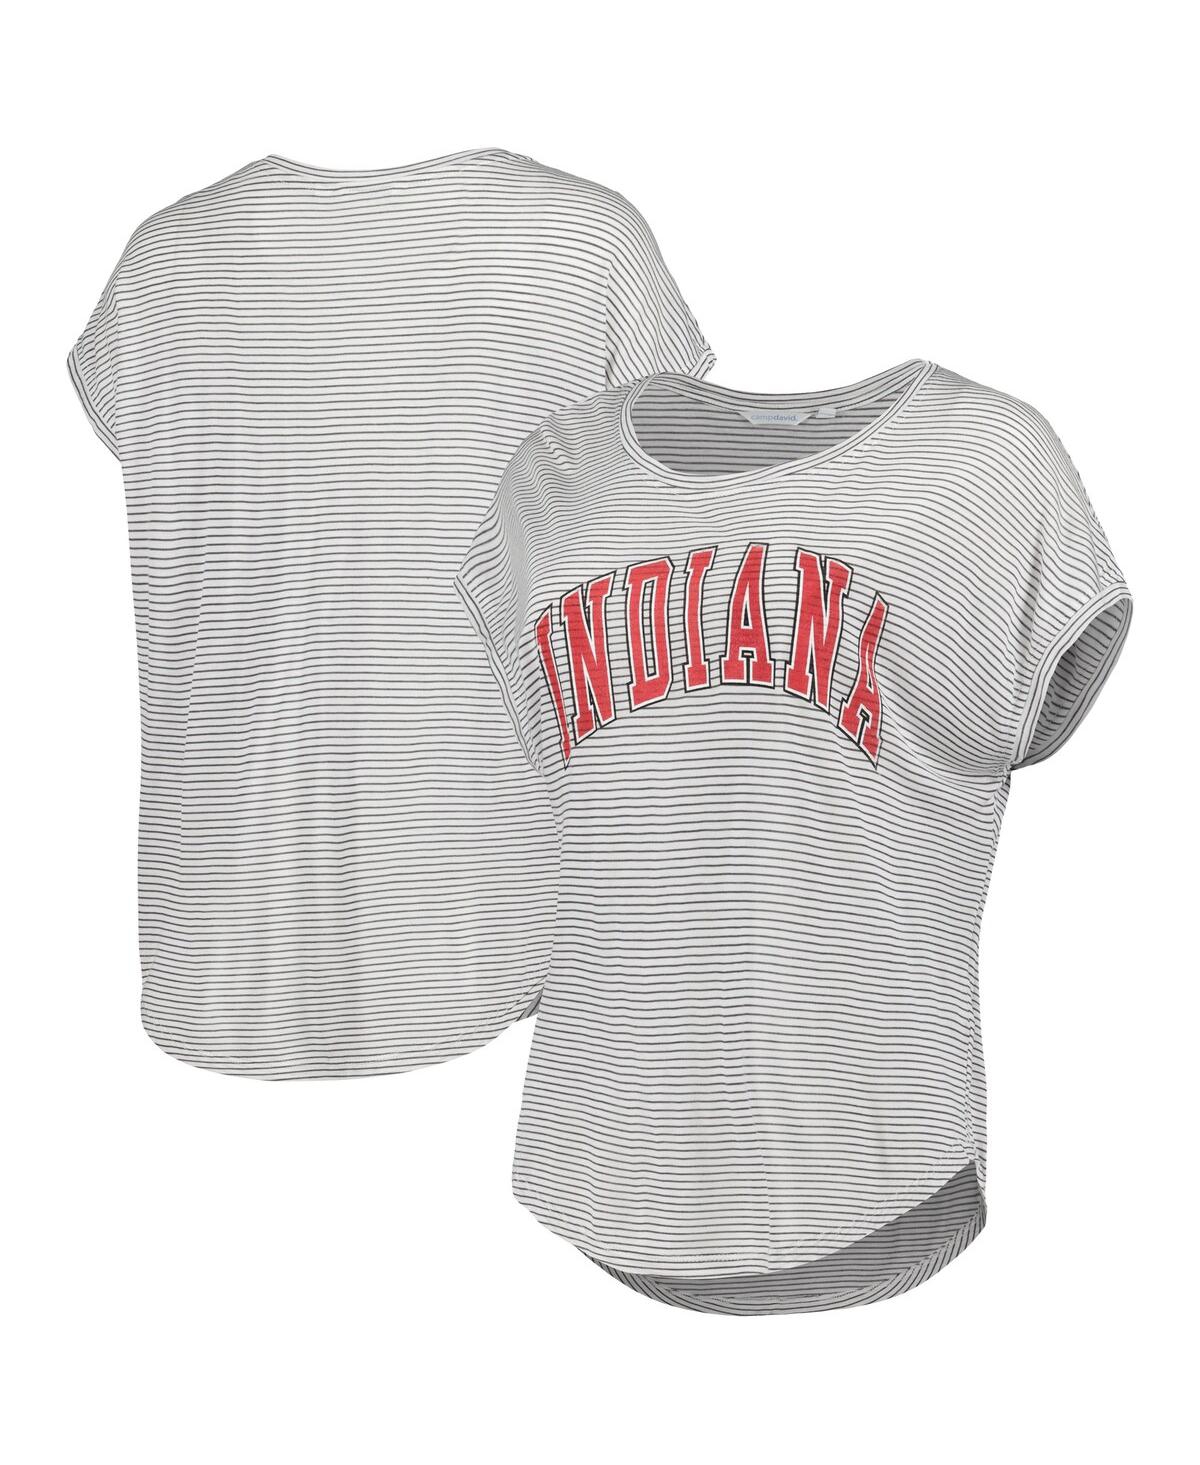 Women's White, Charcoal Indiana Hoosiers Day Trip Striped Scoop Neck T-shirt - White, Charcoal